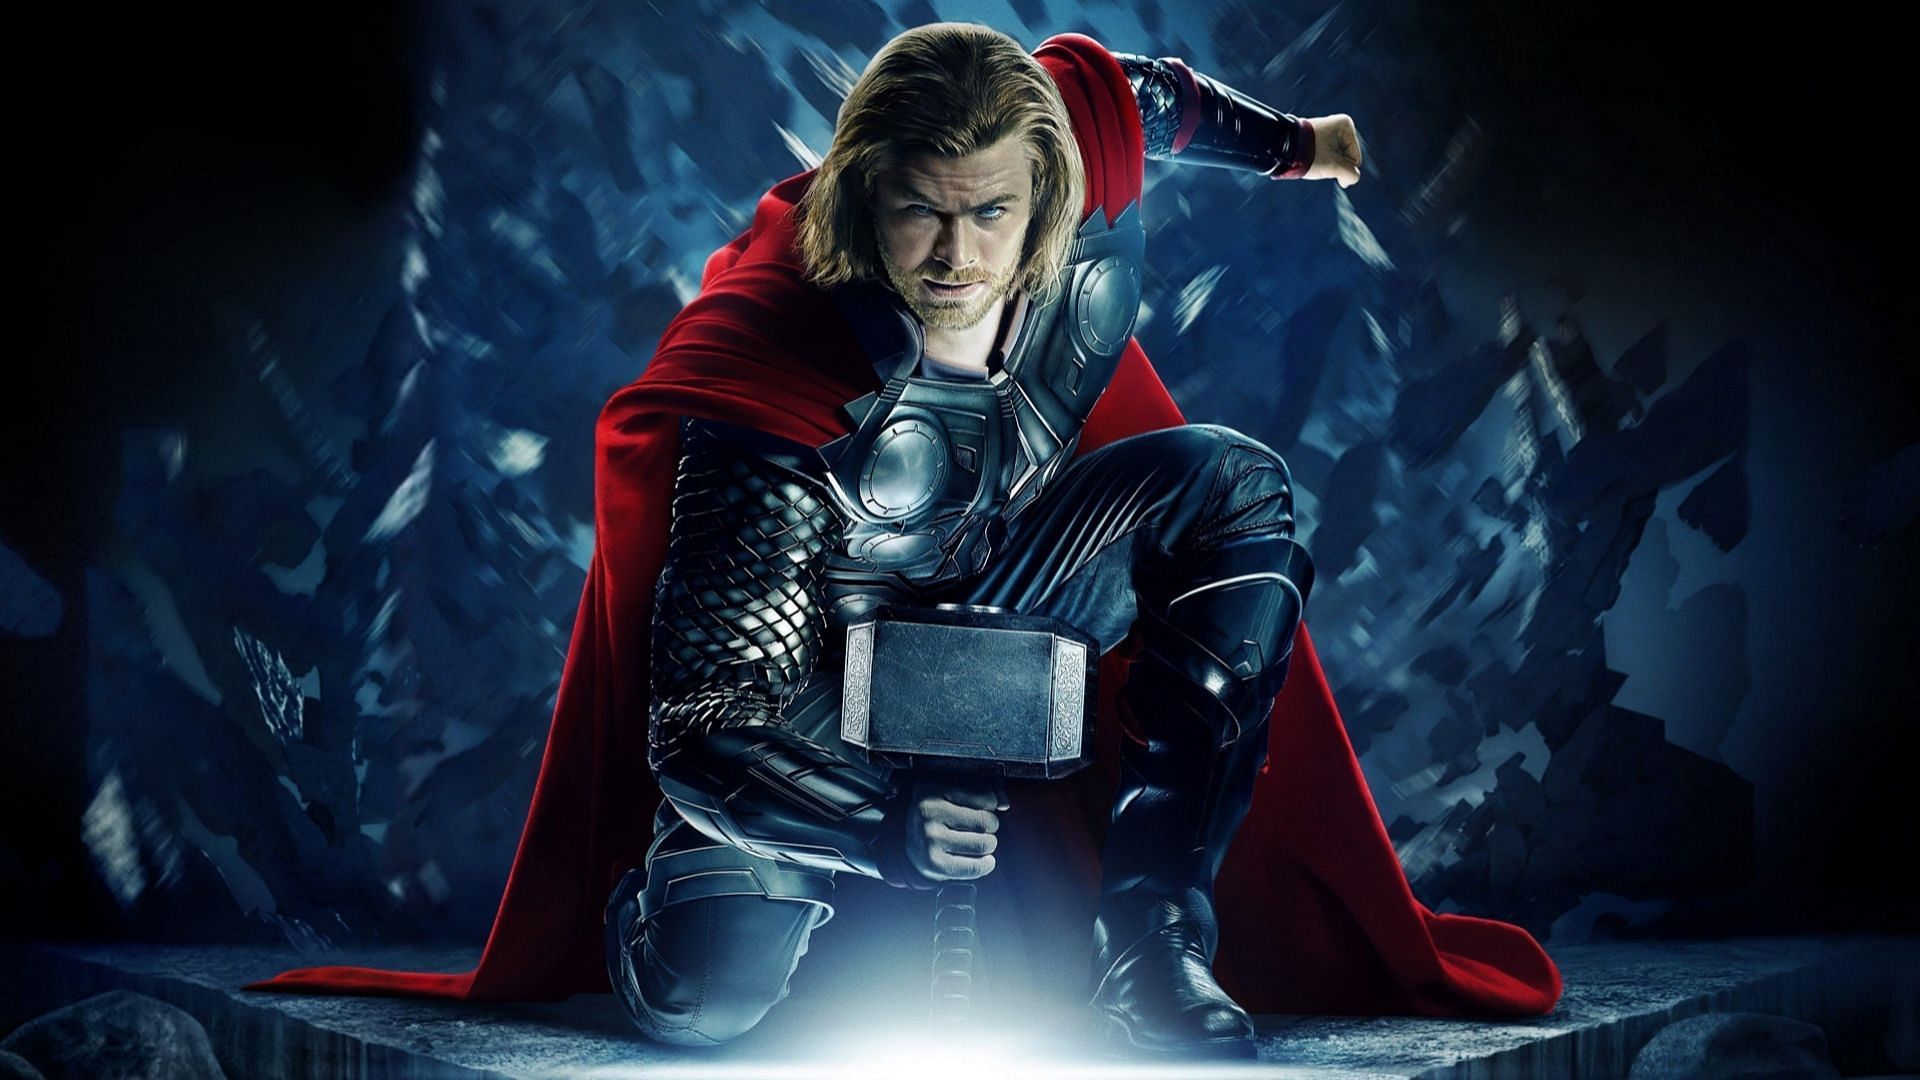 Thor is renowned as one of the most powerful and well-known characters in the Marvel universe. (Image via Marvel)